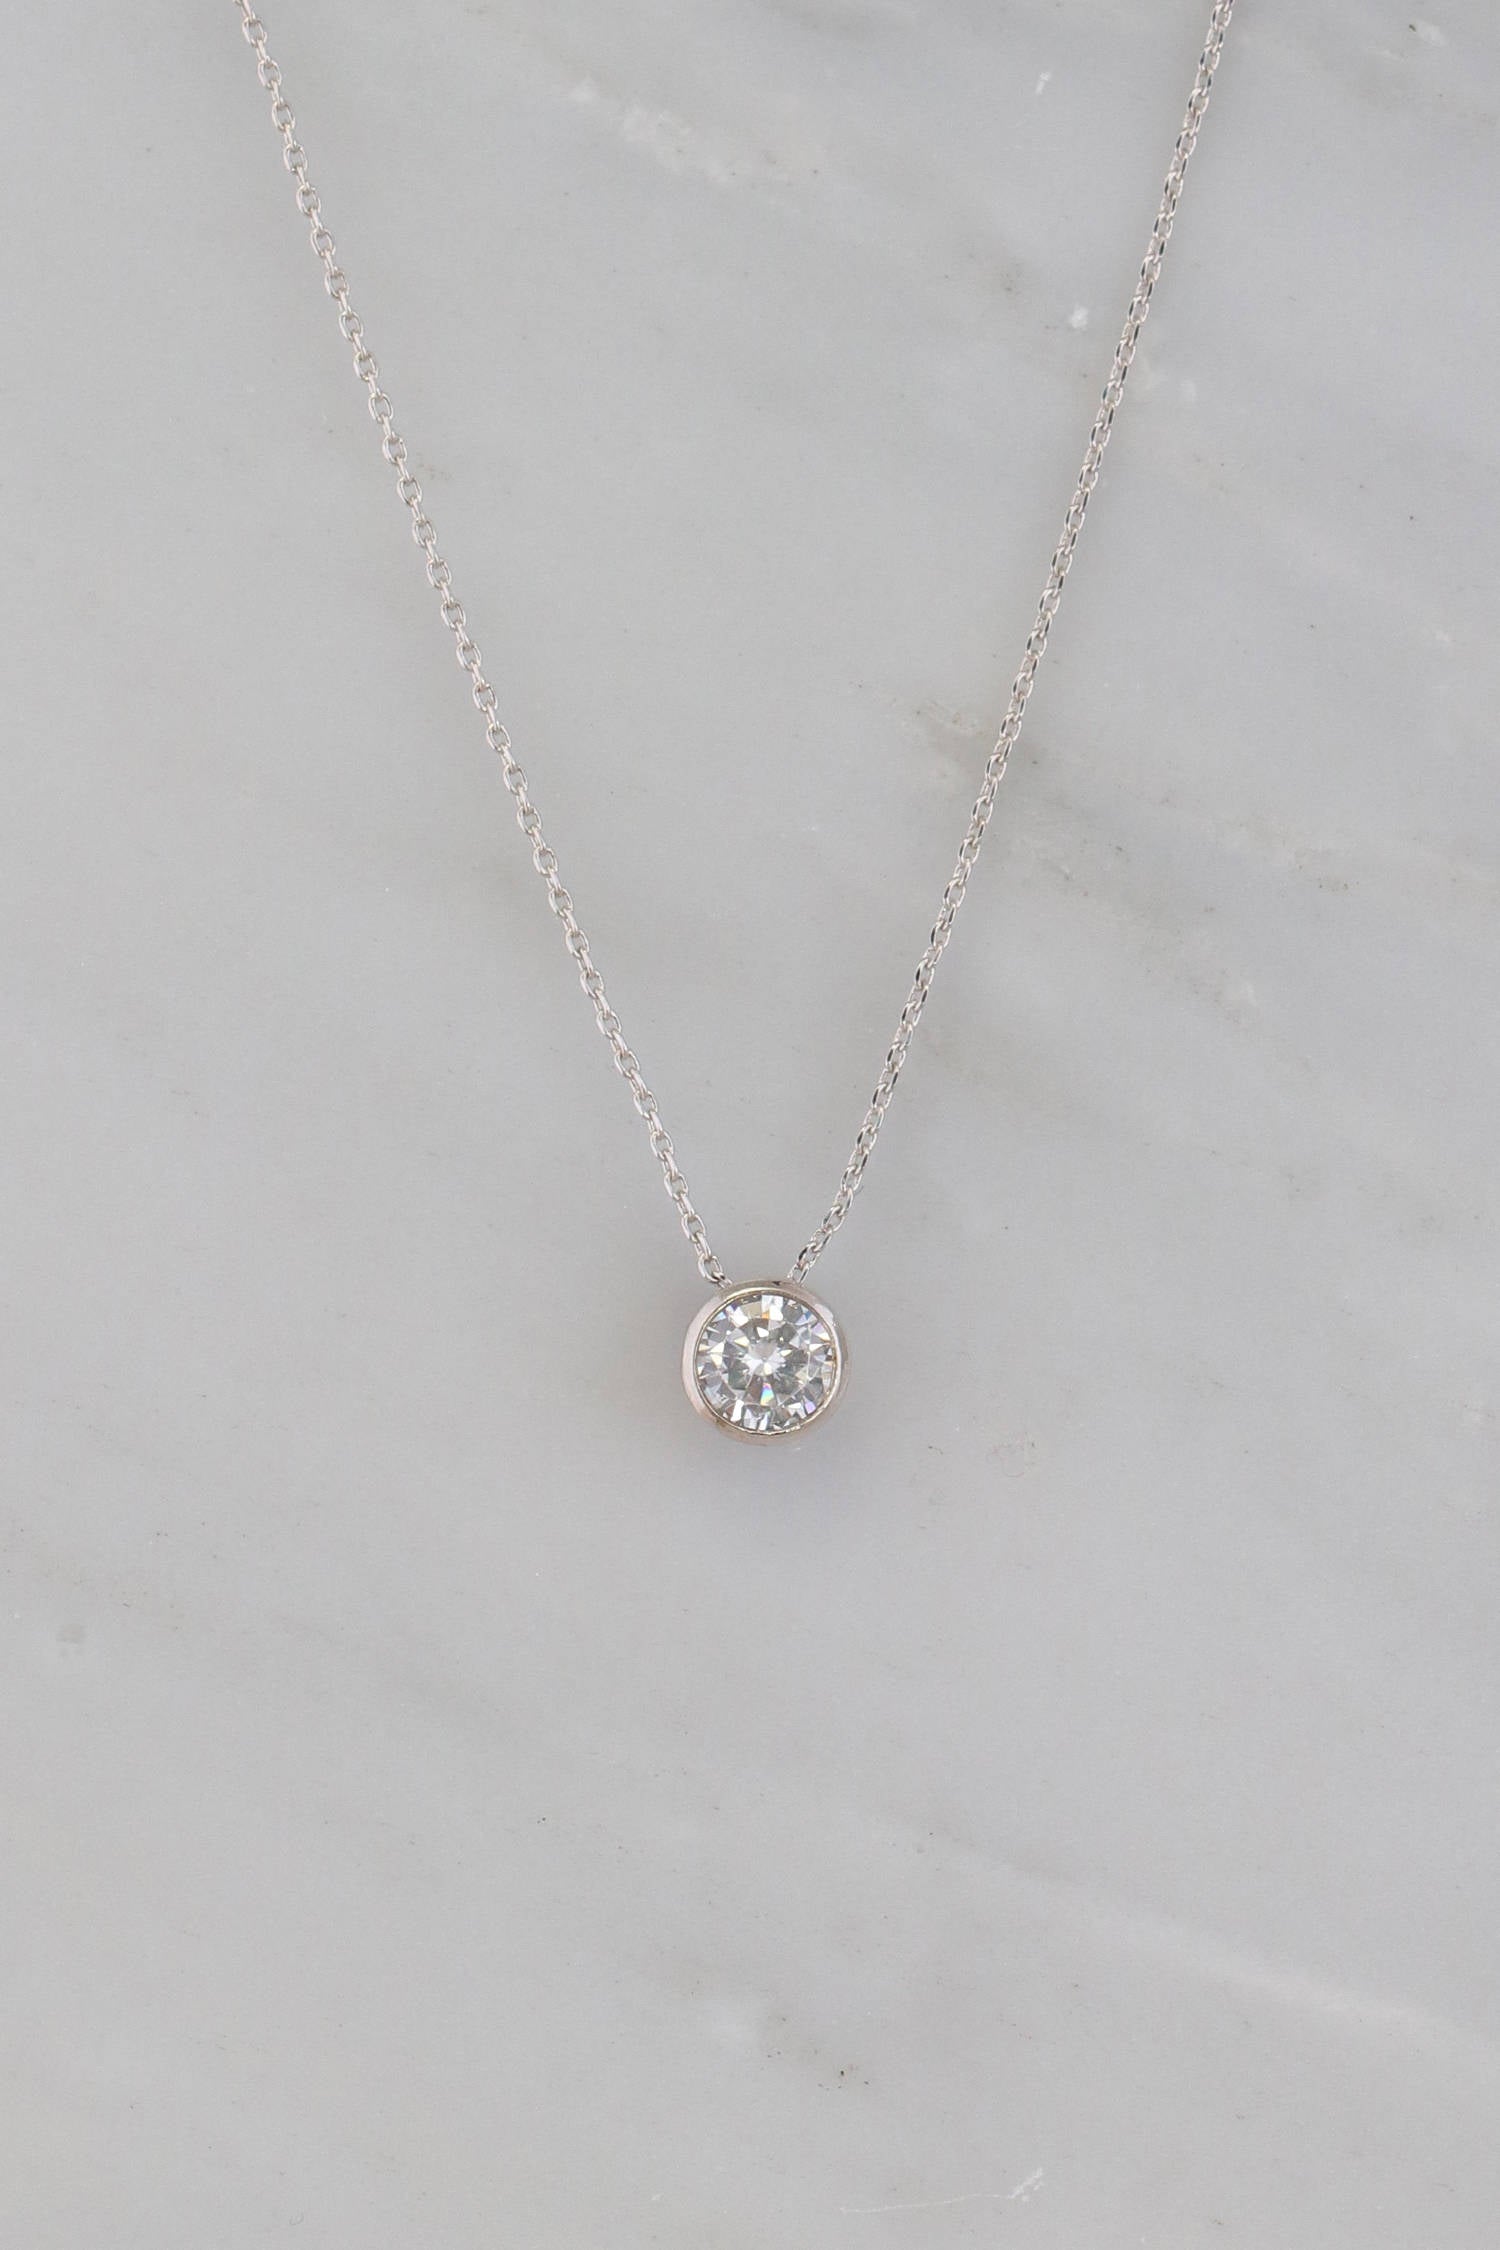 Solitaire Diamond Necklace - Dainty Solitaire - Delicate Solitaire - Floating Diamond - Silver Chain - CZ Solitaire Necklace - Round diamond